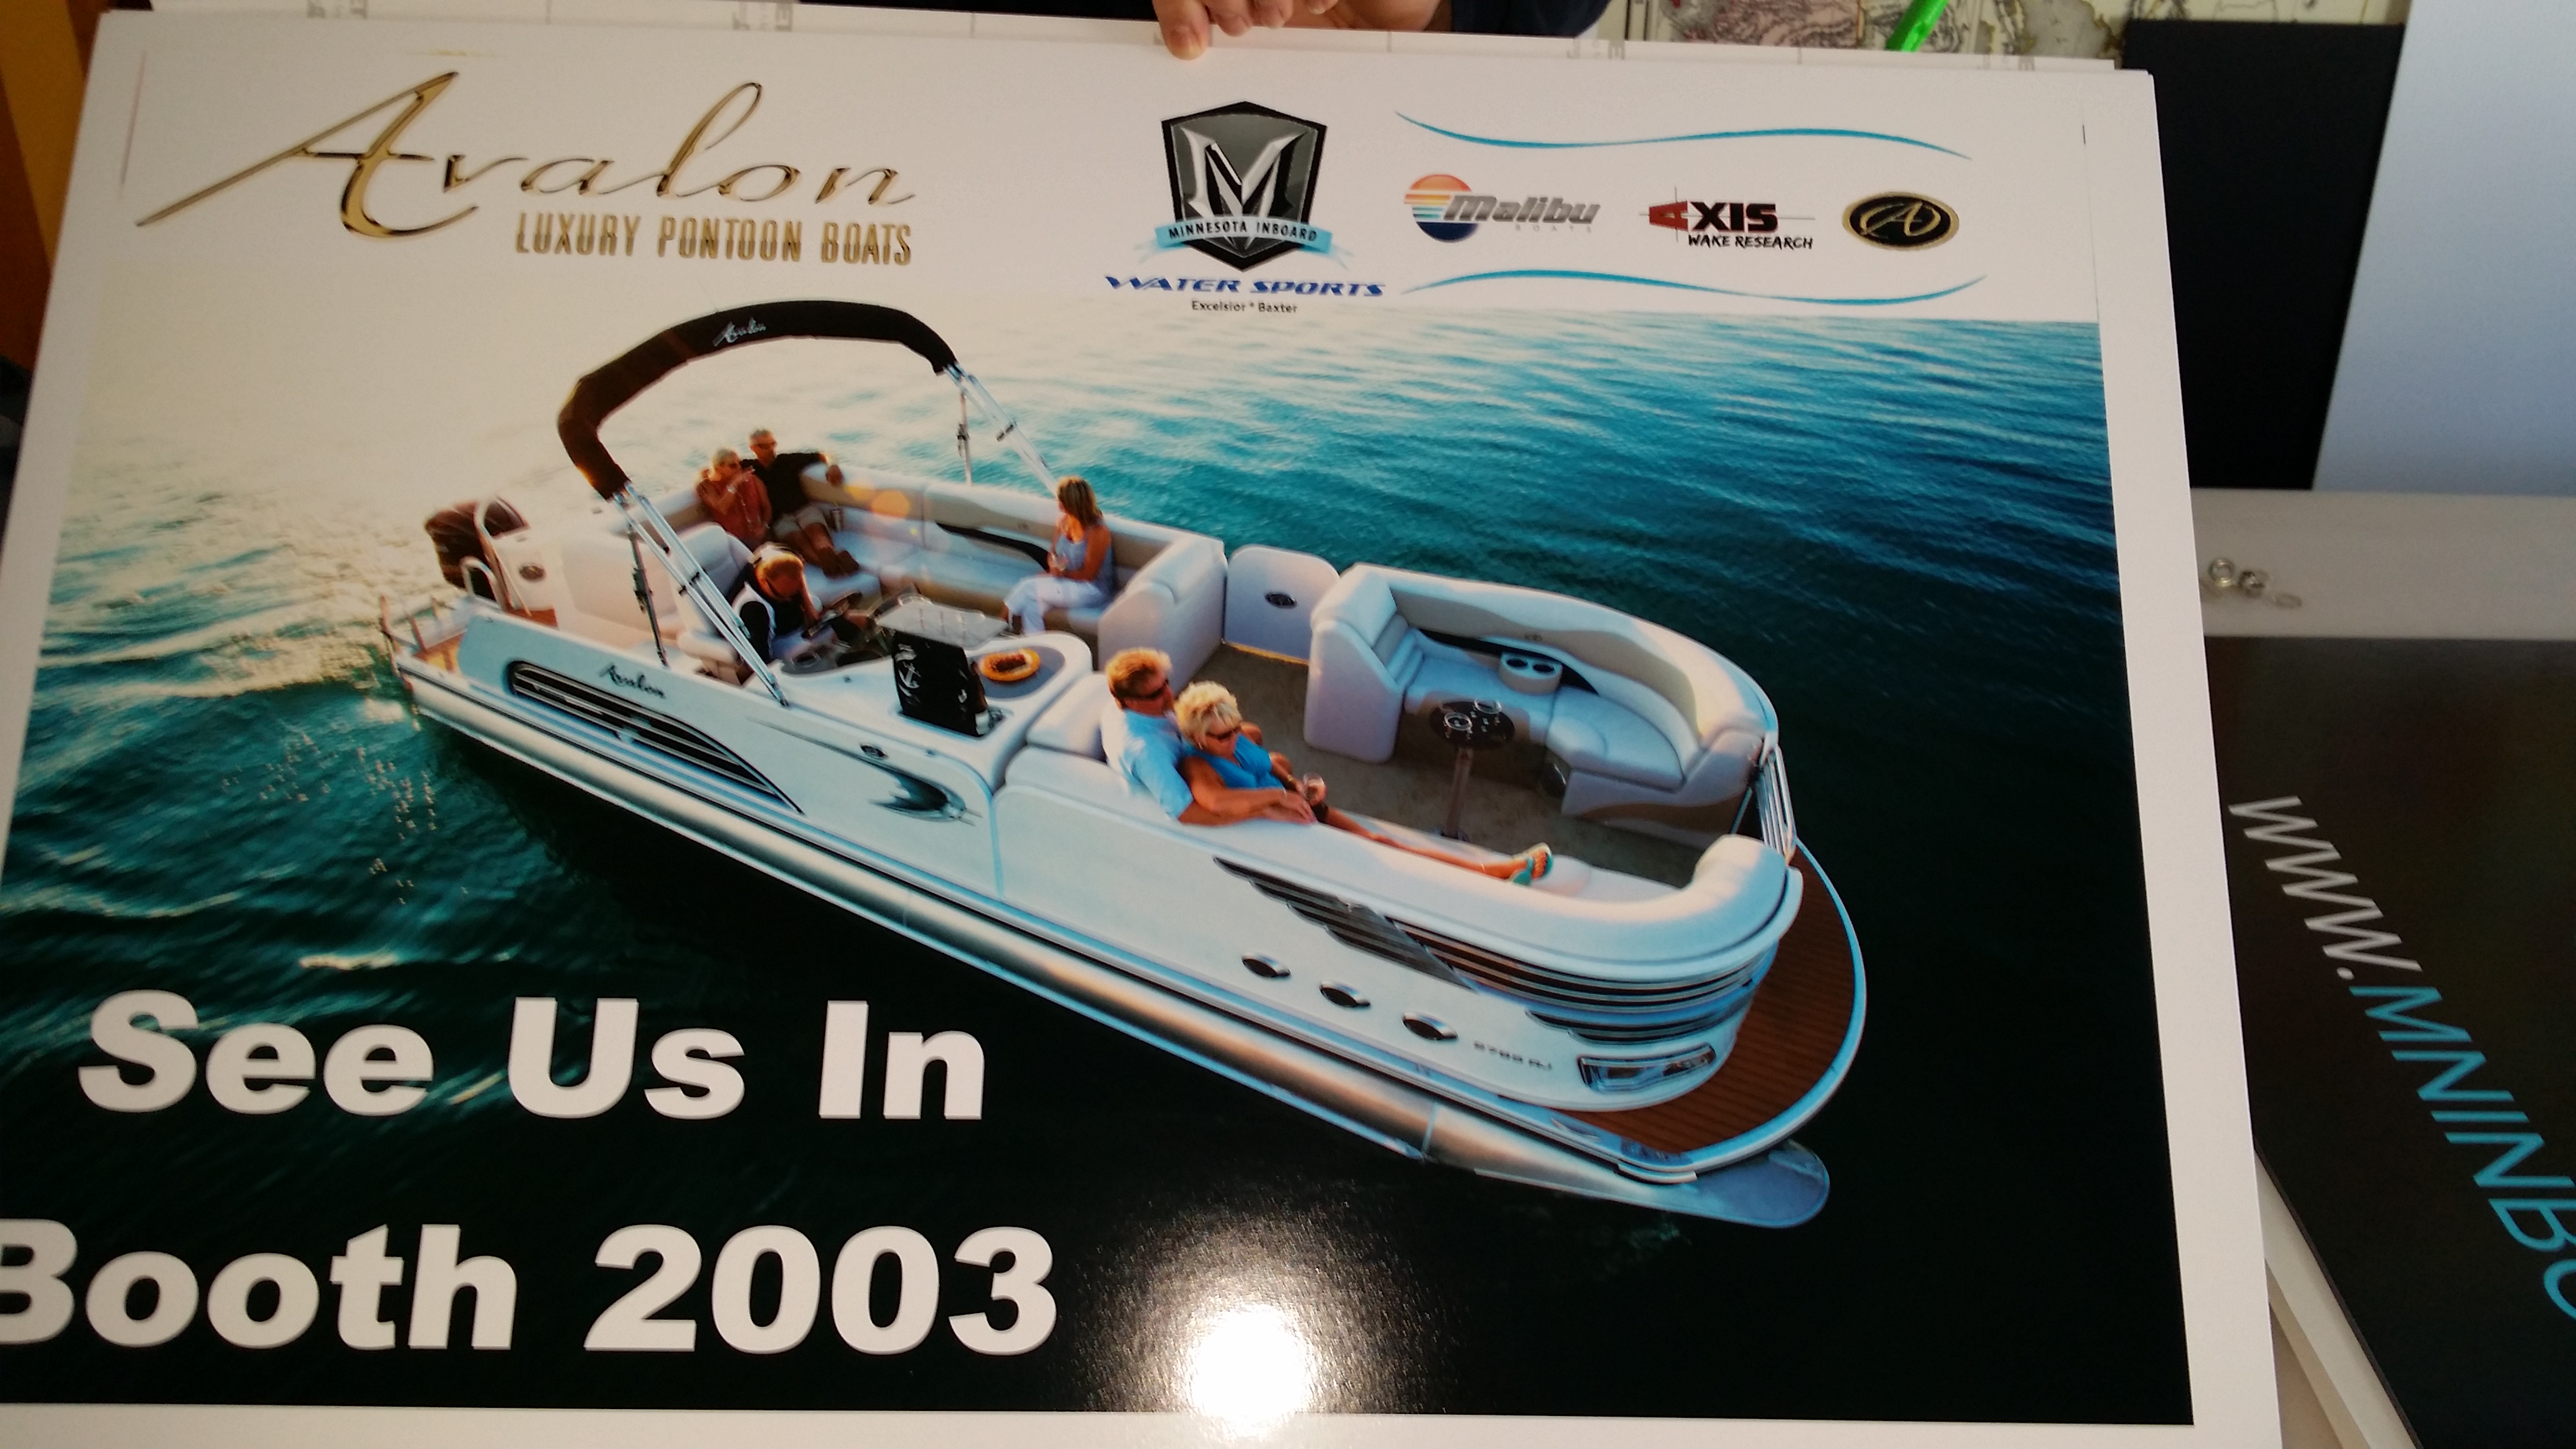 Visit Minnesota Inboard at the boat show in Minneapolis!